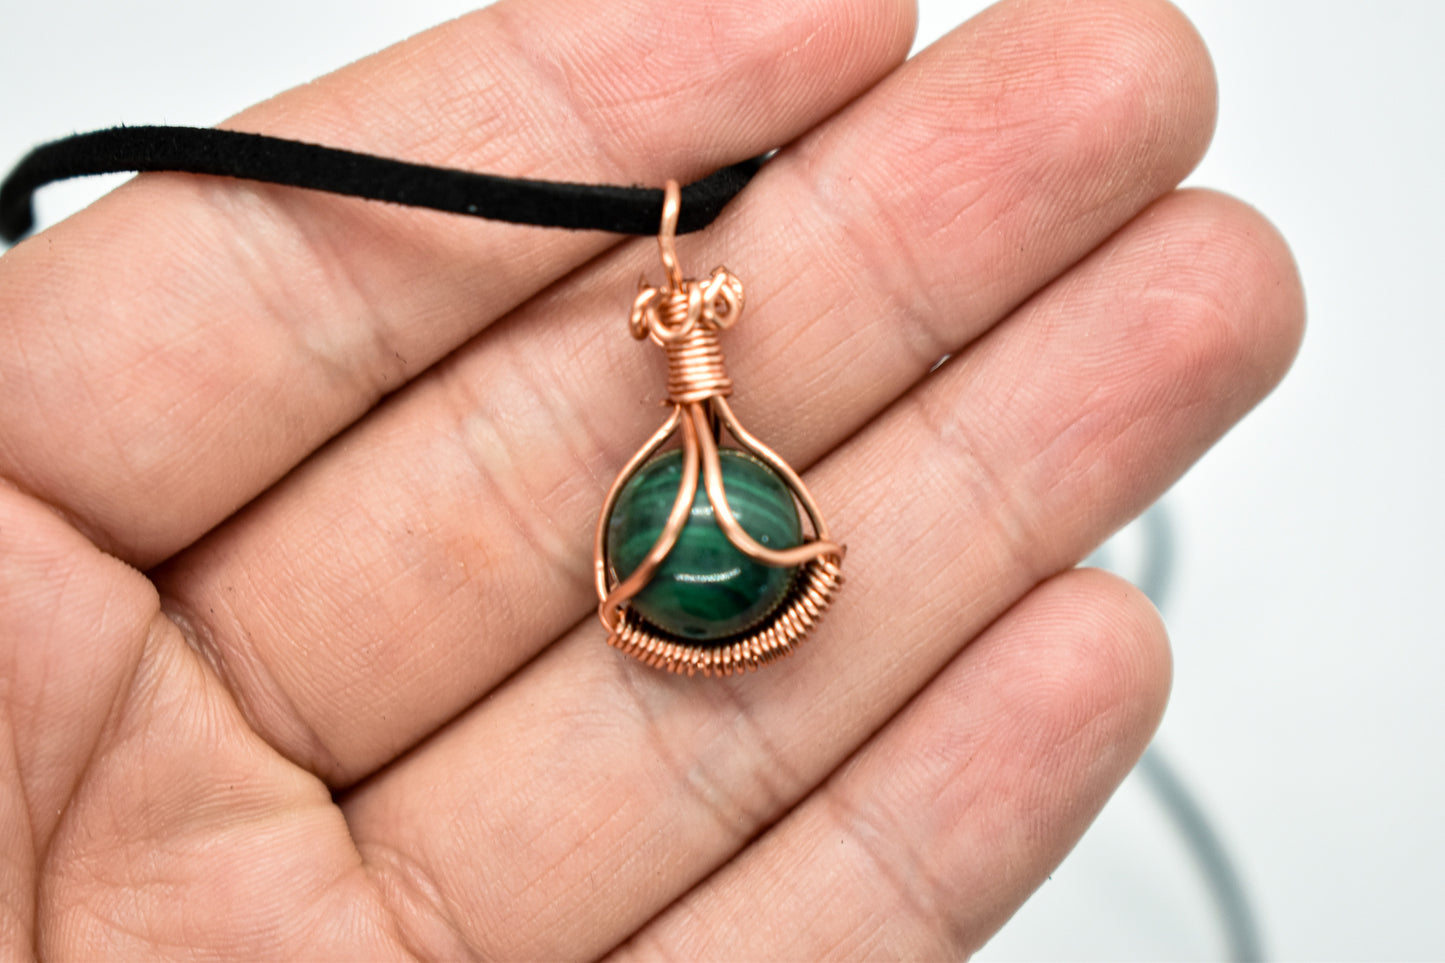 Copper Wrapped Malachite Beaded Necklace